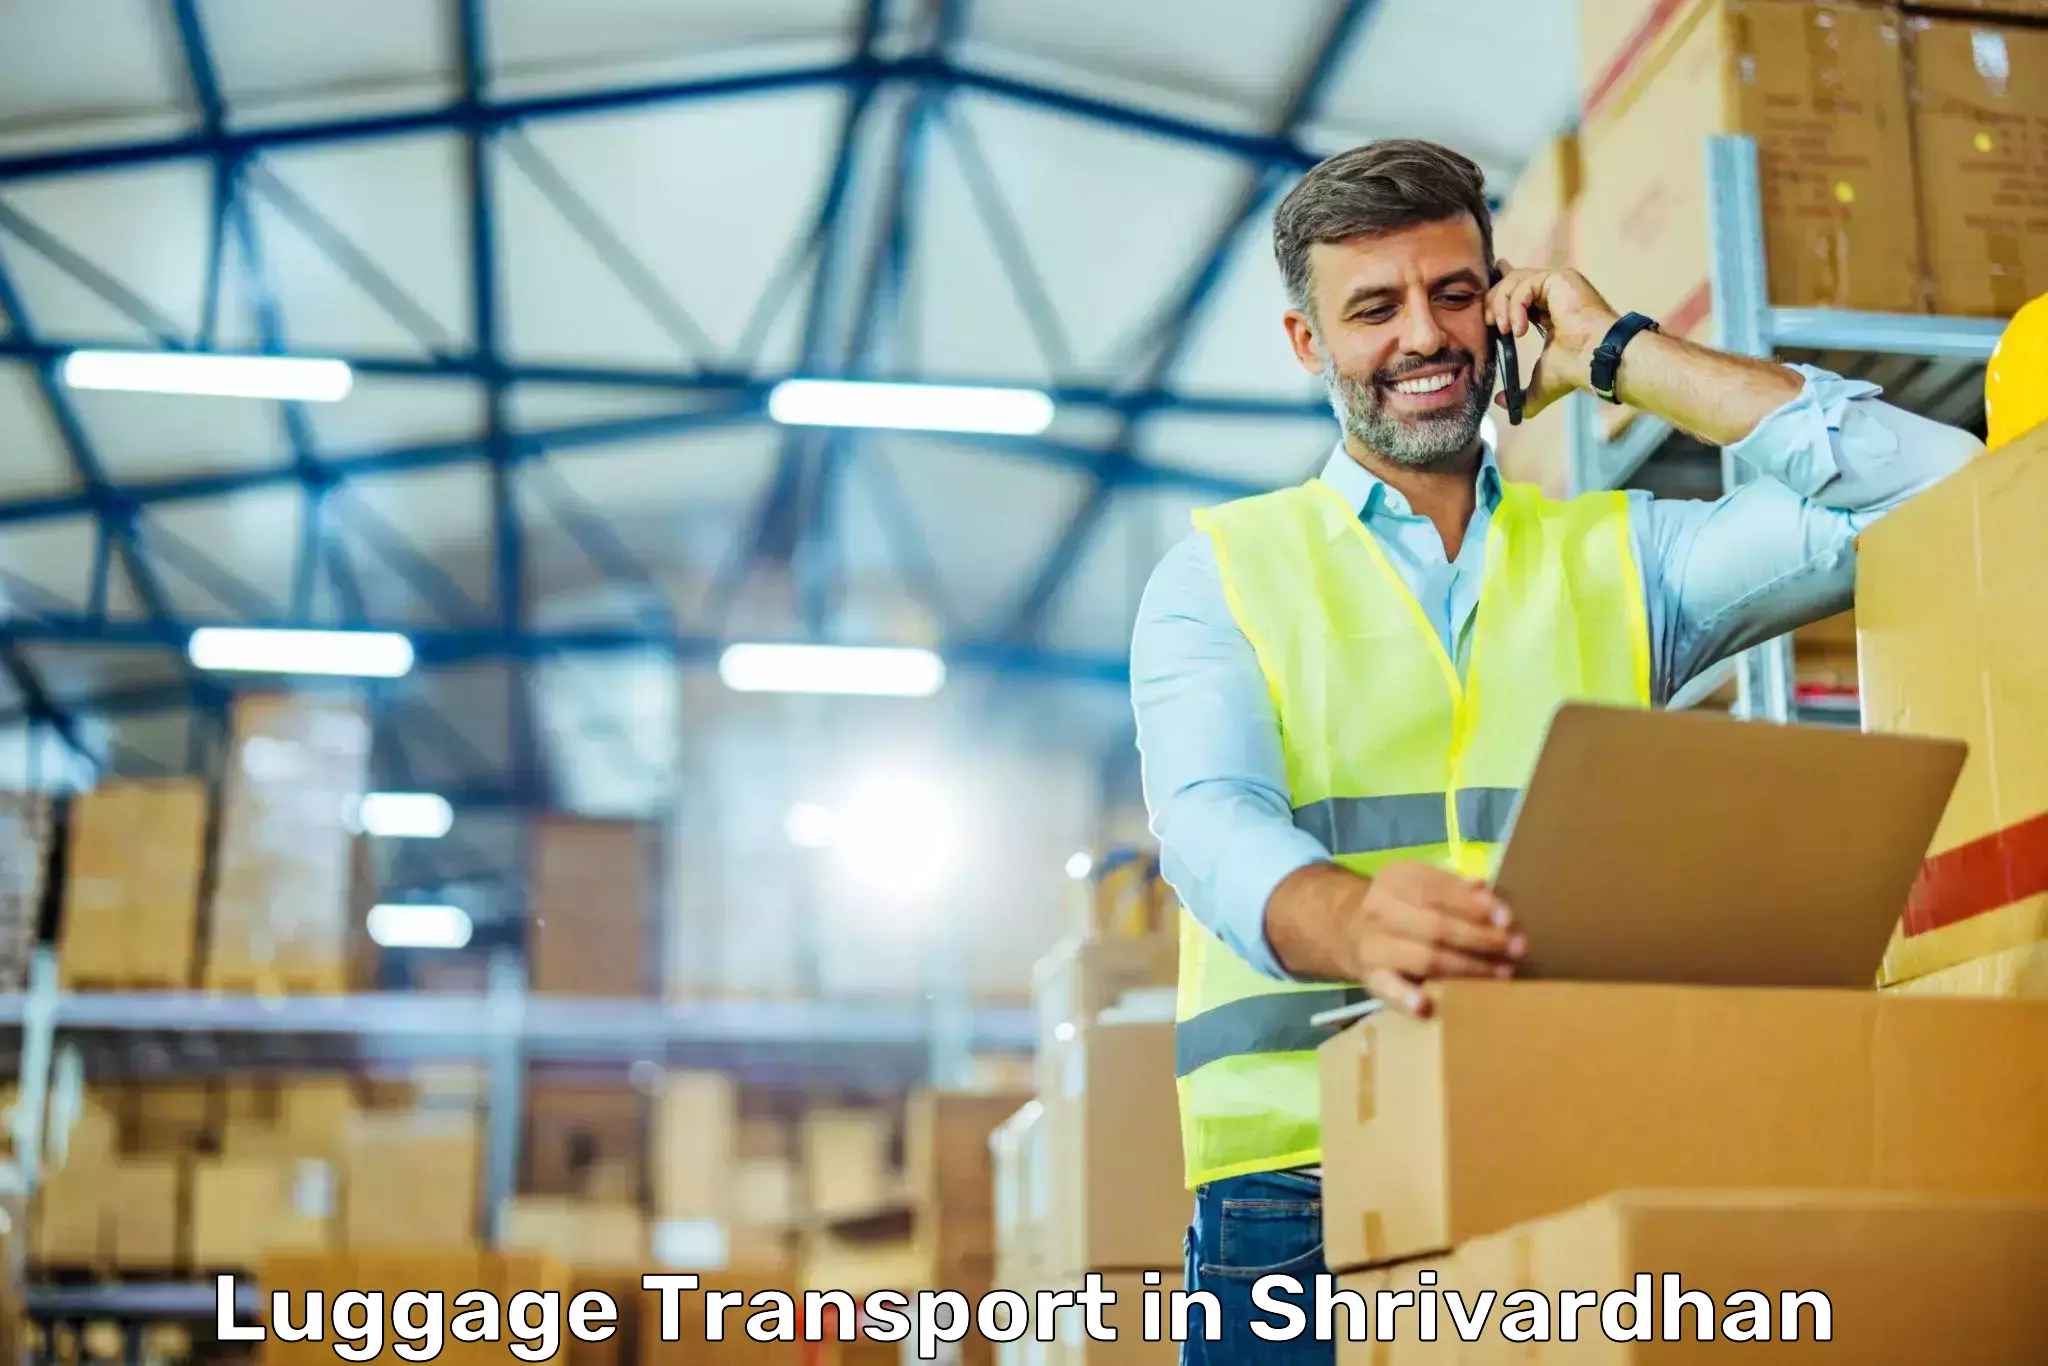 Luggage delivery optimization in Shrivardhan